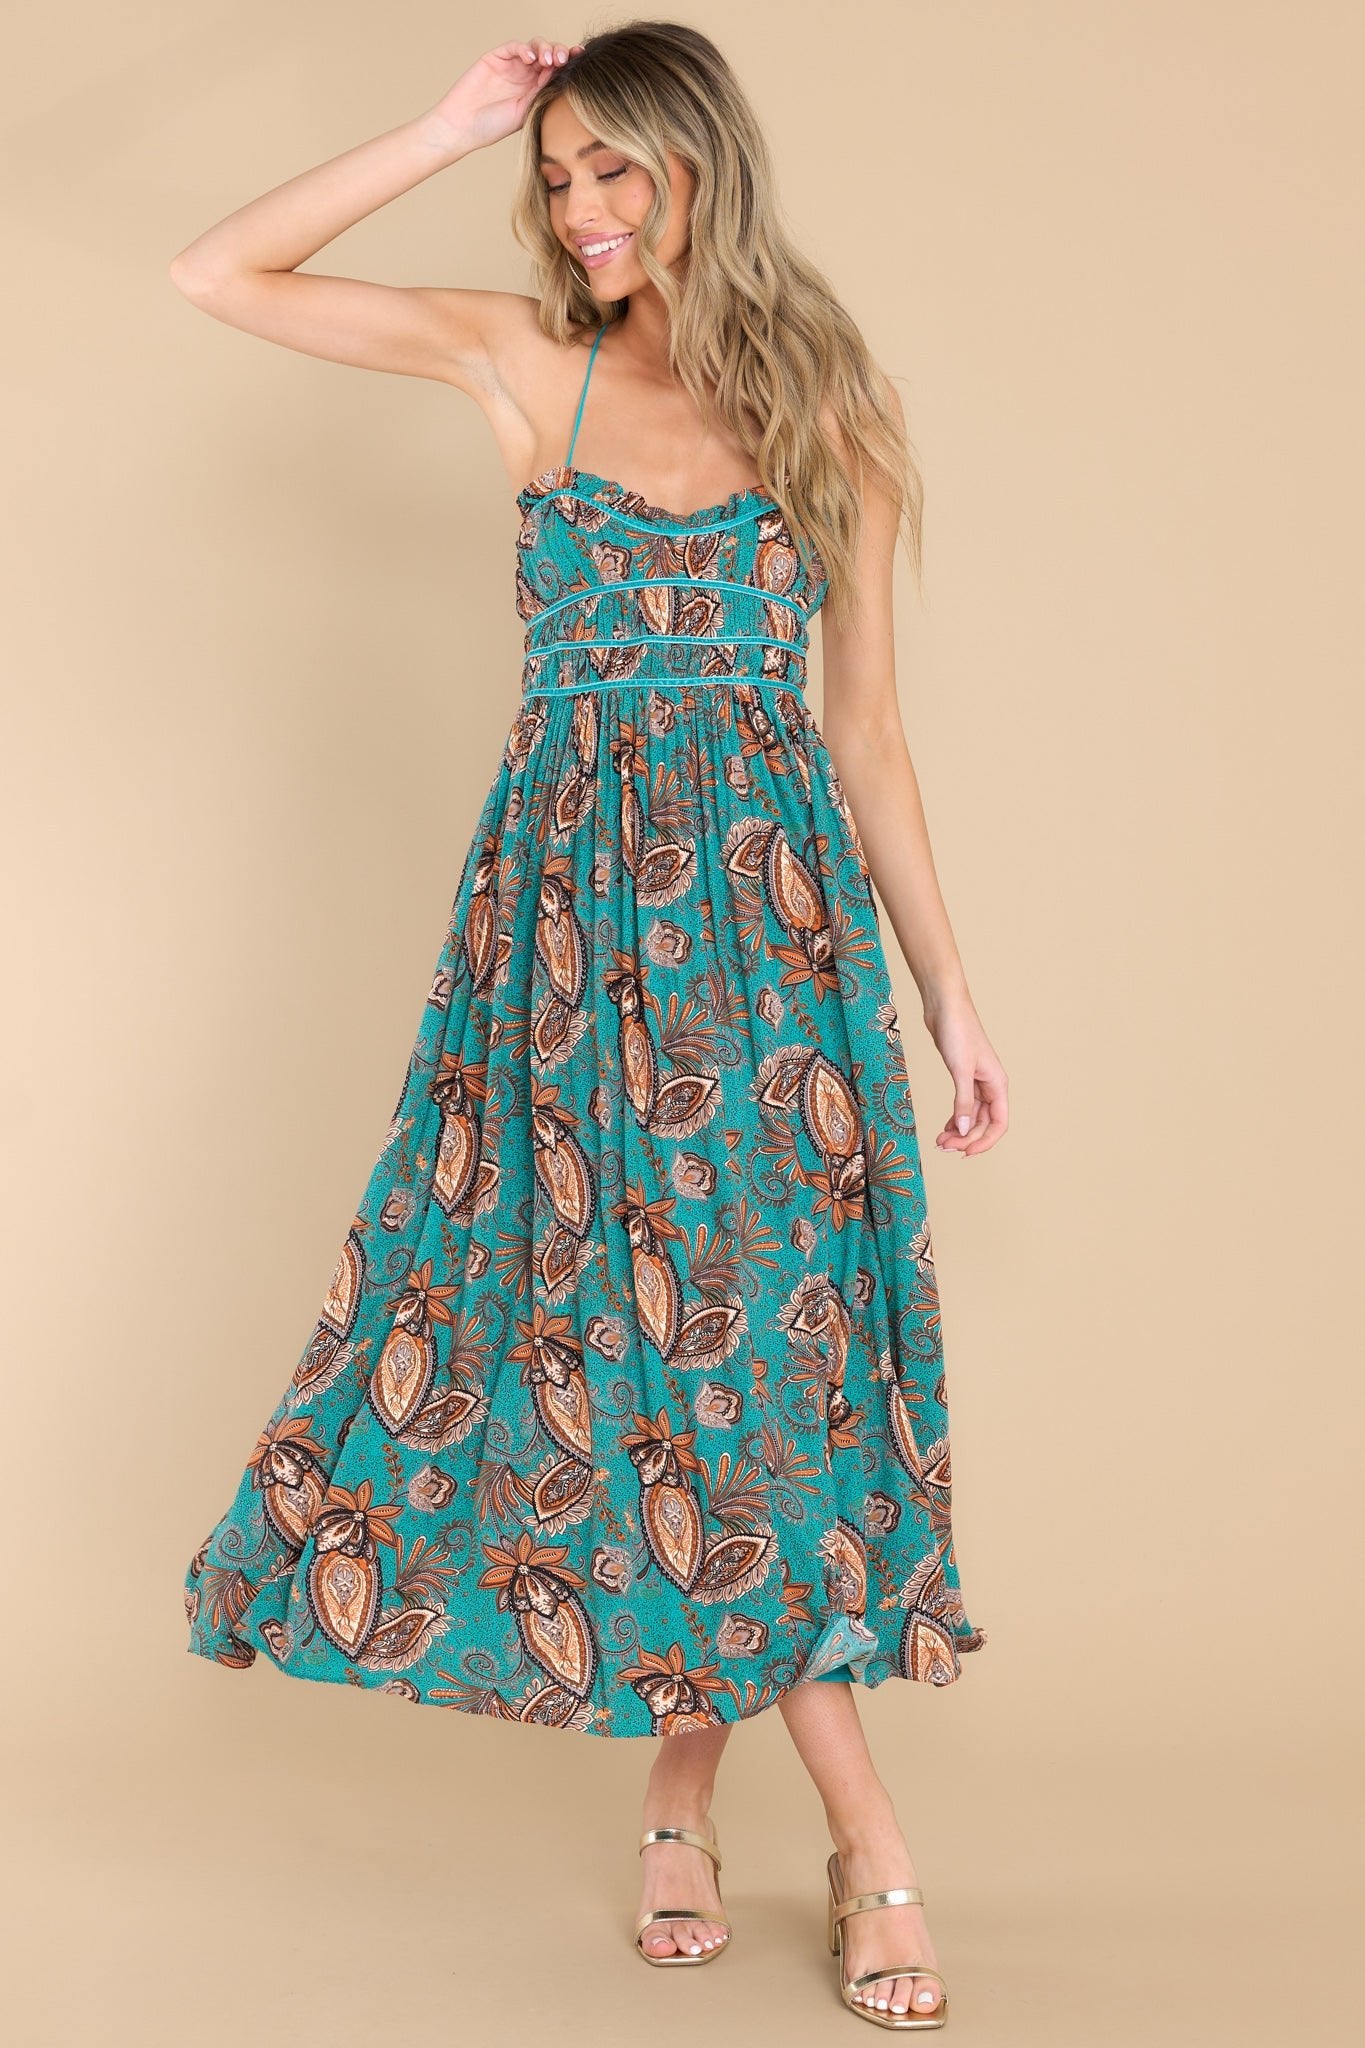 Timeless Moments Turquoise Blue Floral Print Midi Dress - Red Dress